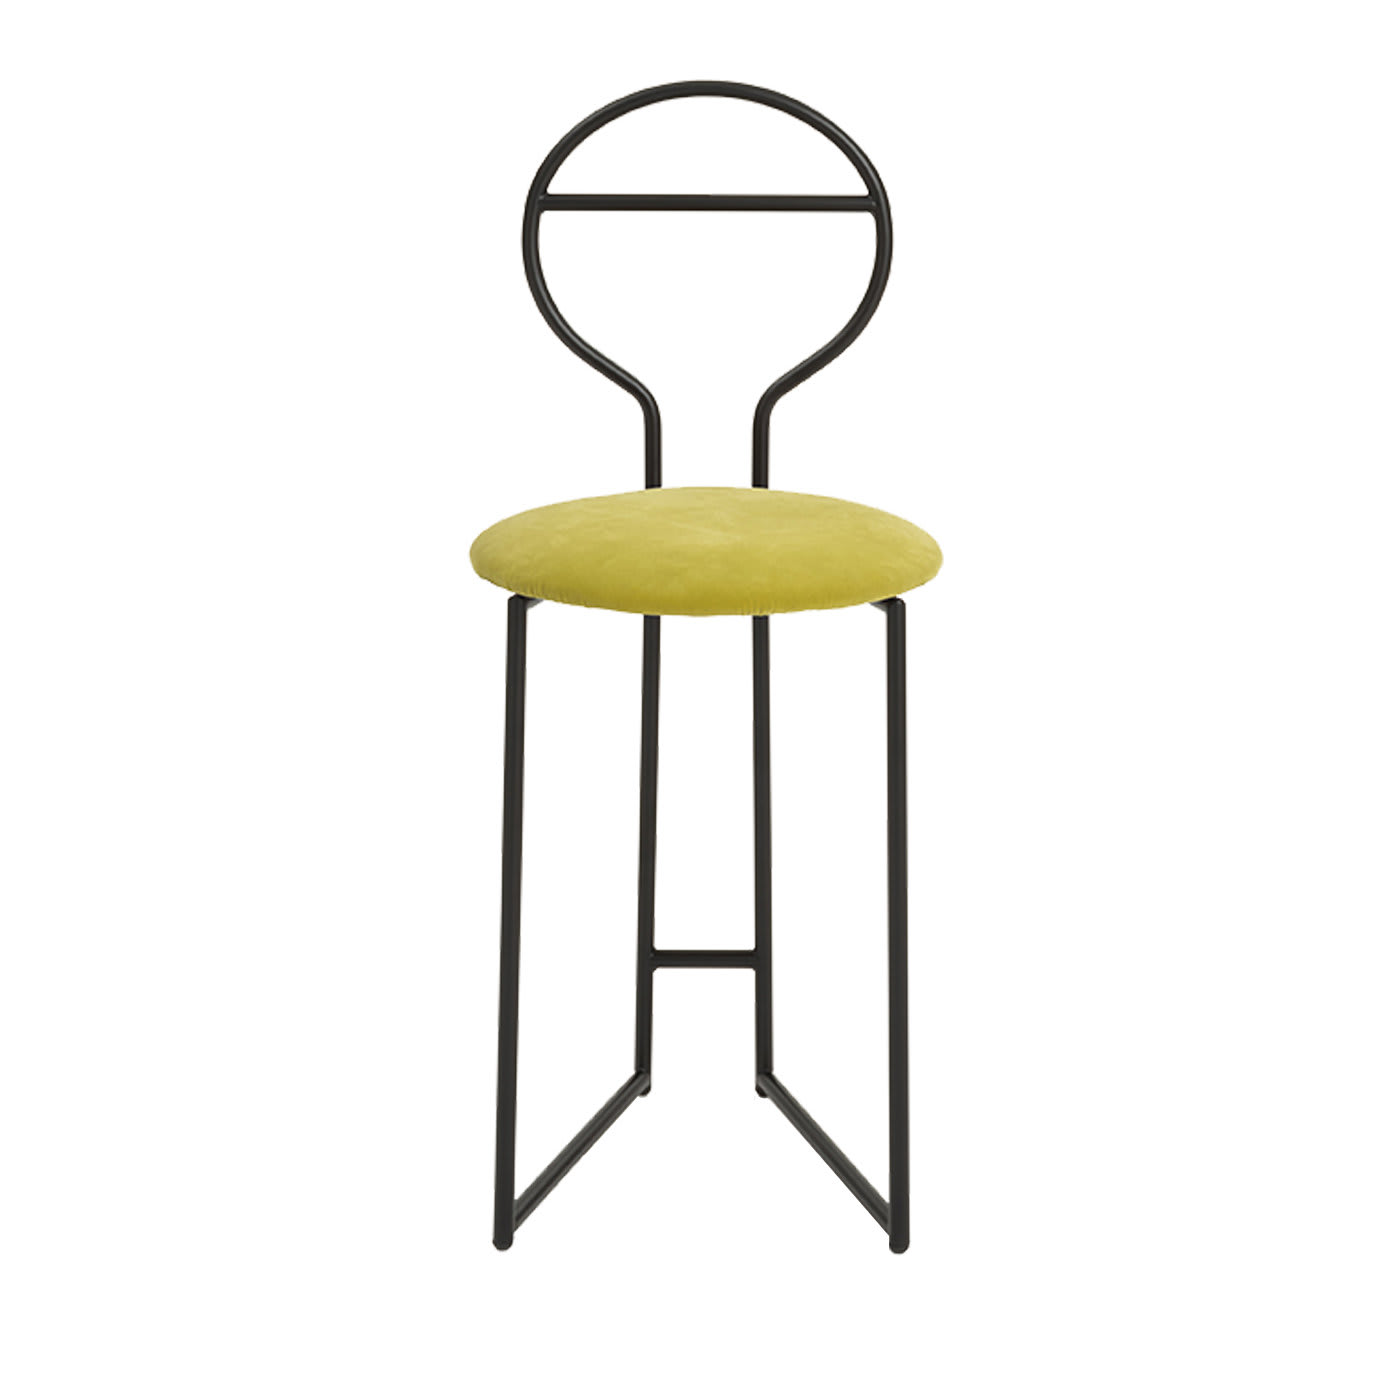 Yellow Joly Chairdrobe with Low Backrest by Lorenz + Kaz - Colé